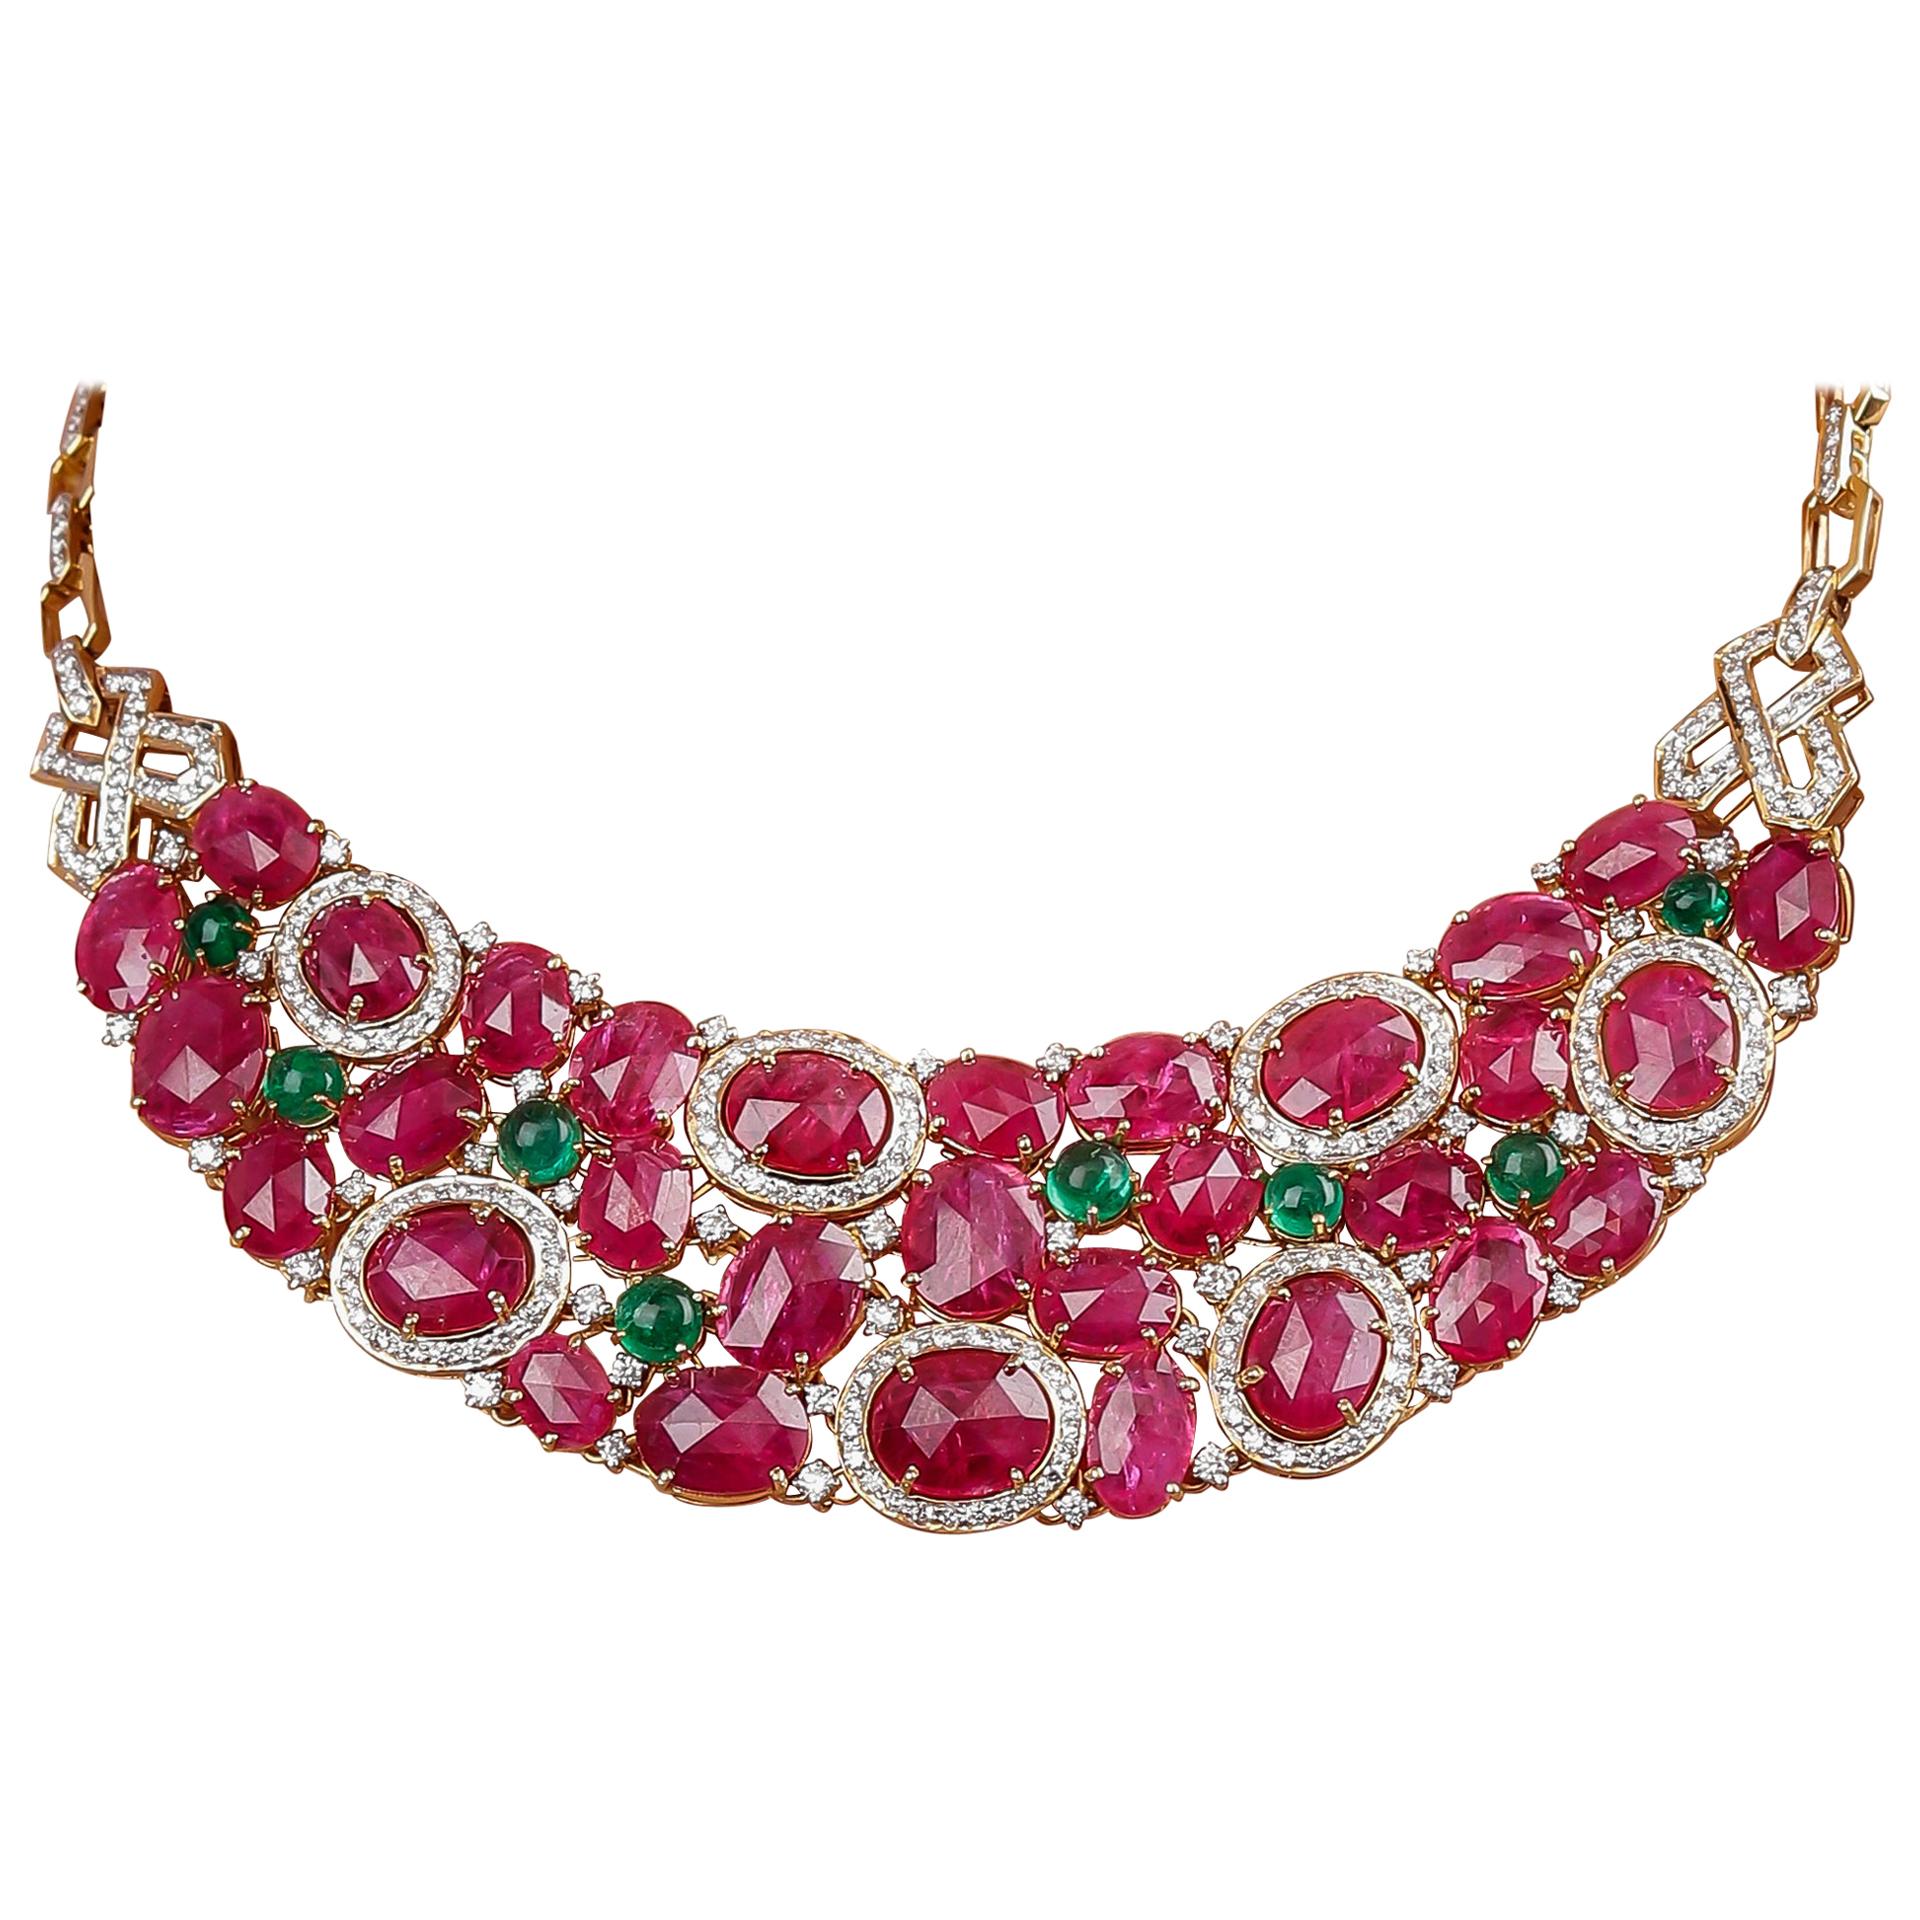 57.62 Carats Ruby Flats Emerald Cabochon and Diamond 18kt Yellow Gold Necklace For Sale